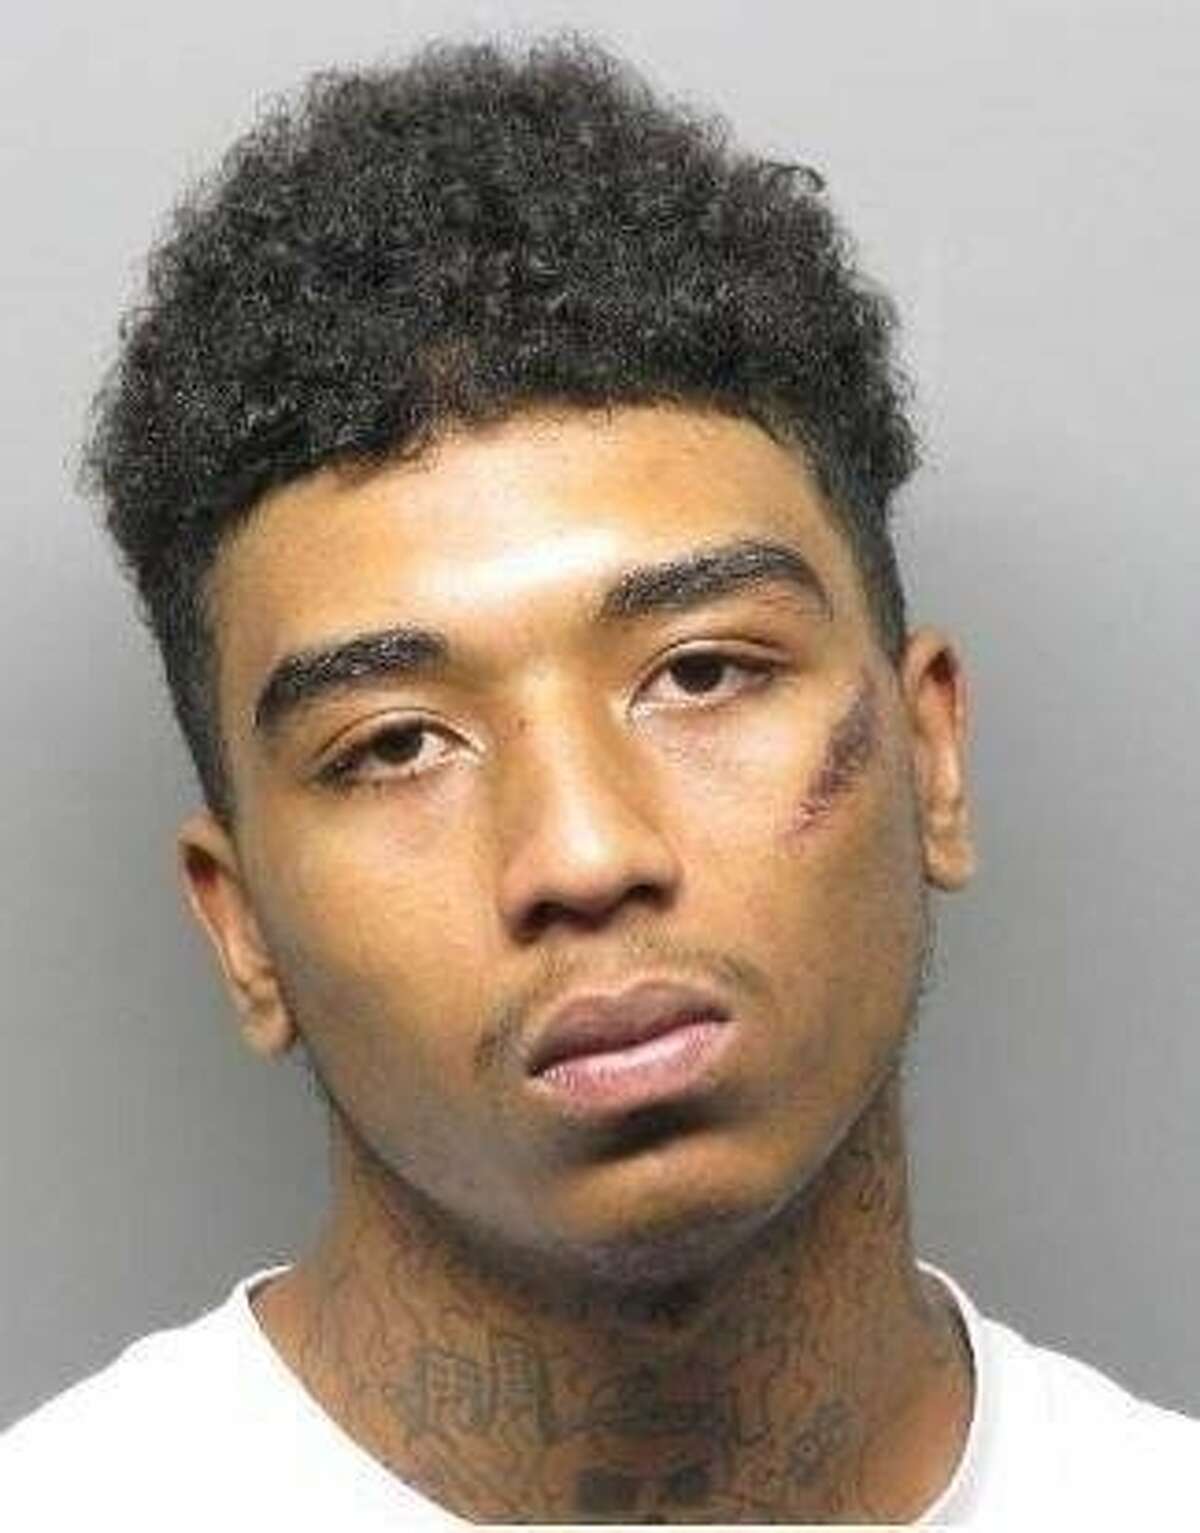 Jason Alexander Brown, 18, is wanted on suspicion of murder and attempted murder after two people were gunned down in a CVS parking lot Saturday night in Livermore.